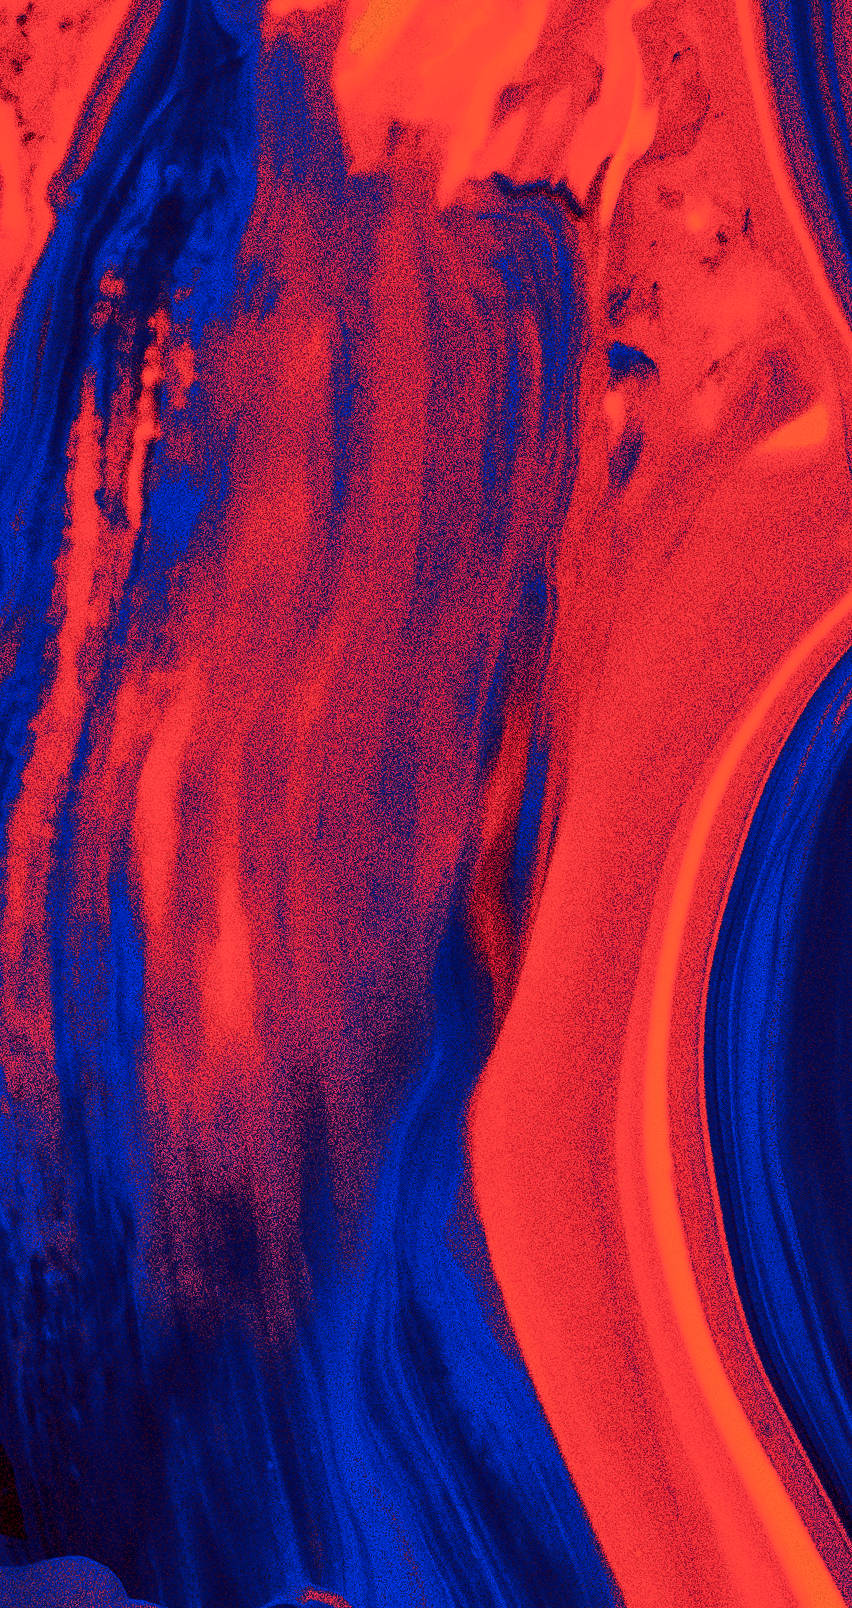 Red And Blue Abstract Painting